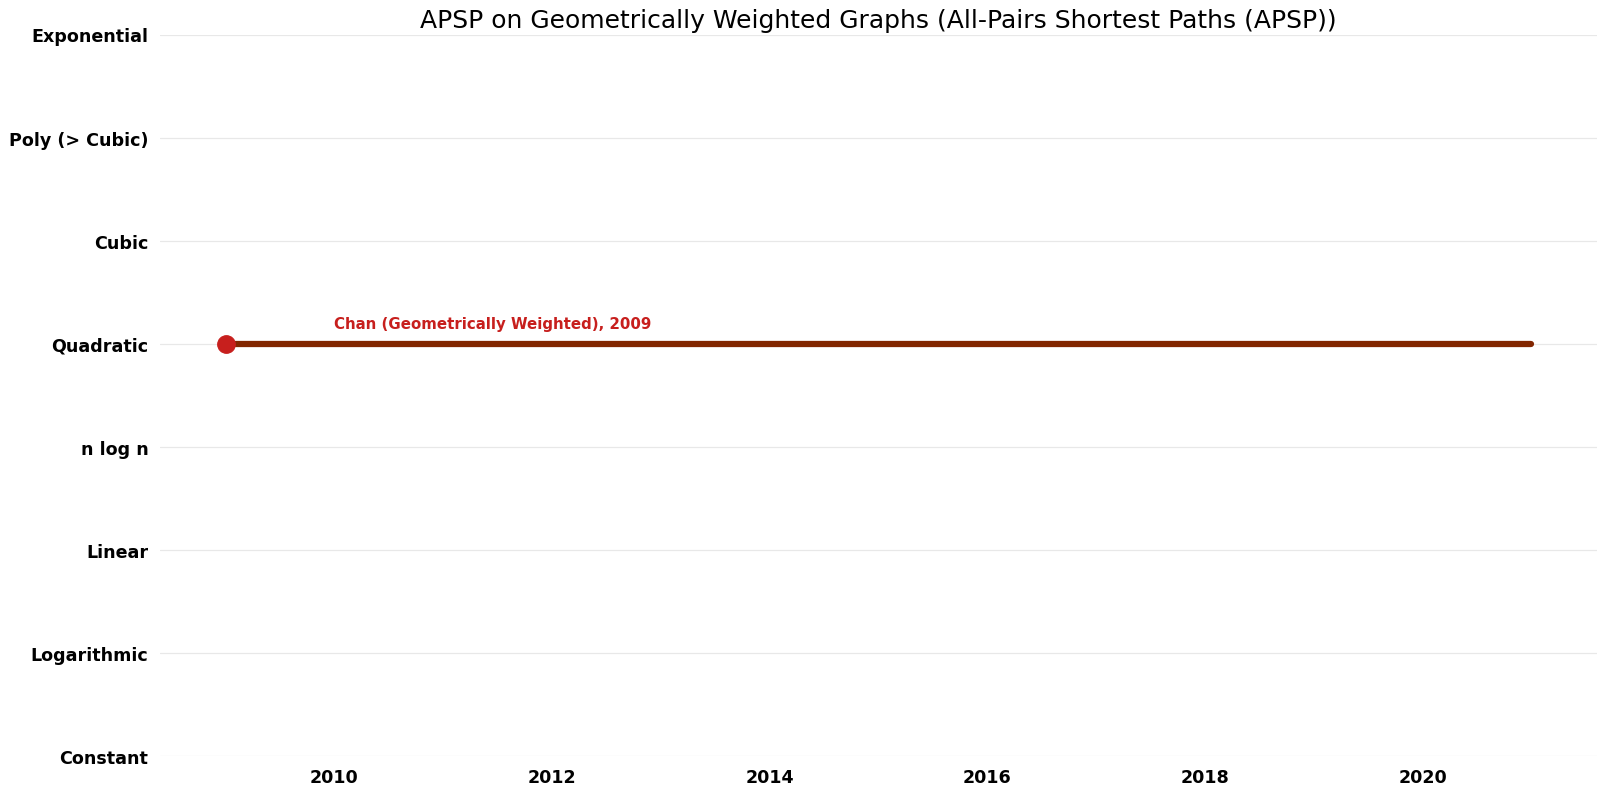 All-Pairs Shortest Paths (APSP) - APSP on Geometrically Weighted Graphs - Space.png